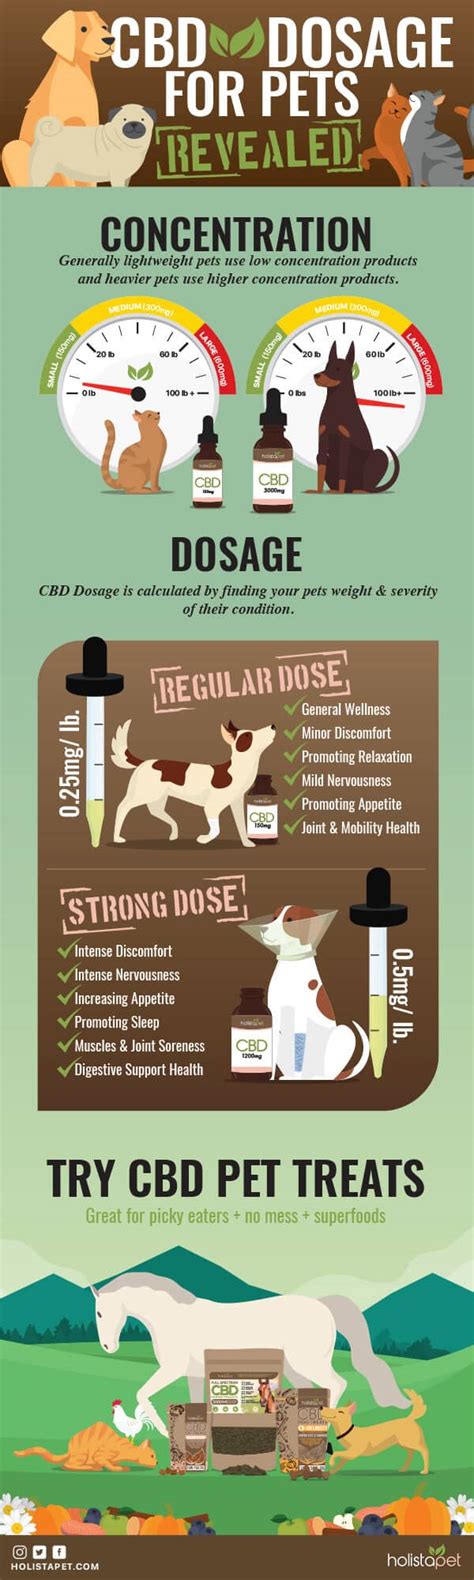  These guidelines help pet owners determine the appropriate amount of CBD oil tincture to administer to their furry companions